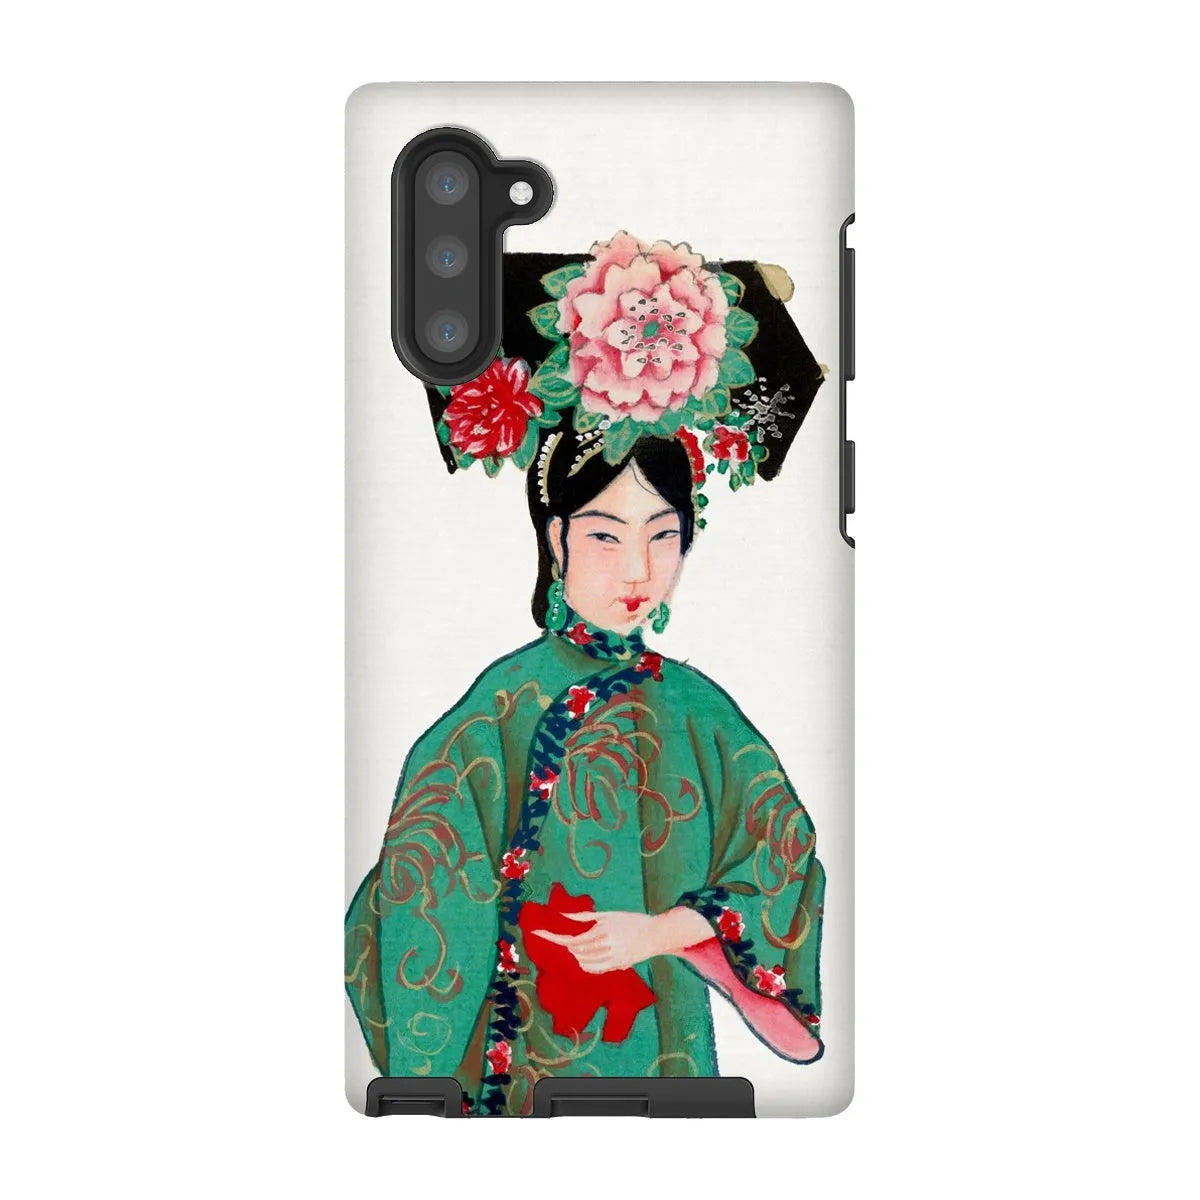 Chinese Noblewoman In Manchu Couture Art Phone Case - Samsung Galaxy Note 10 / Matte - Mobile Phone Cases - Aesthetic